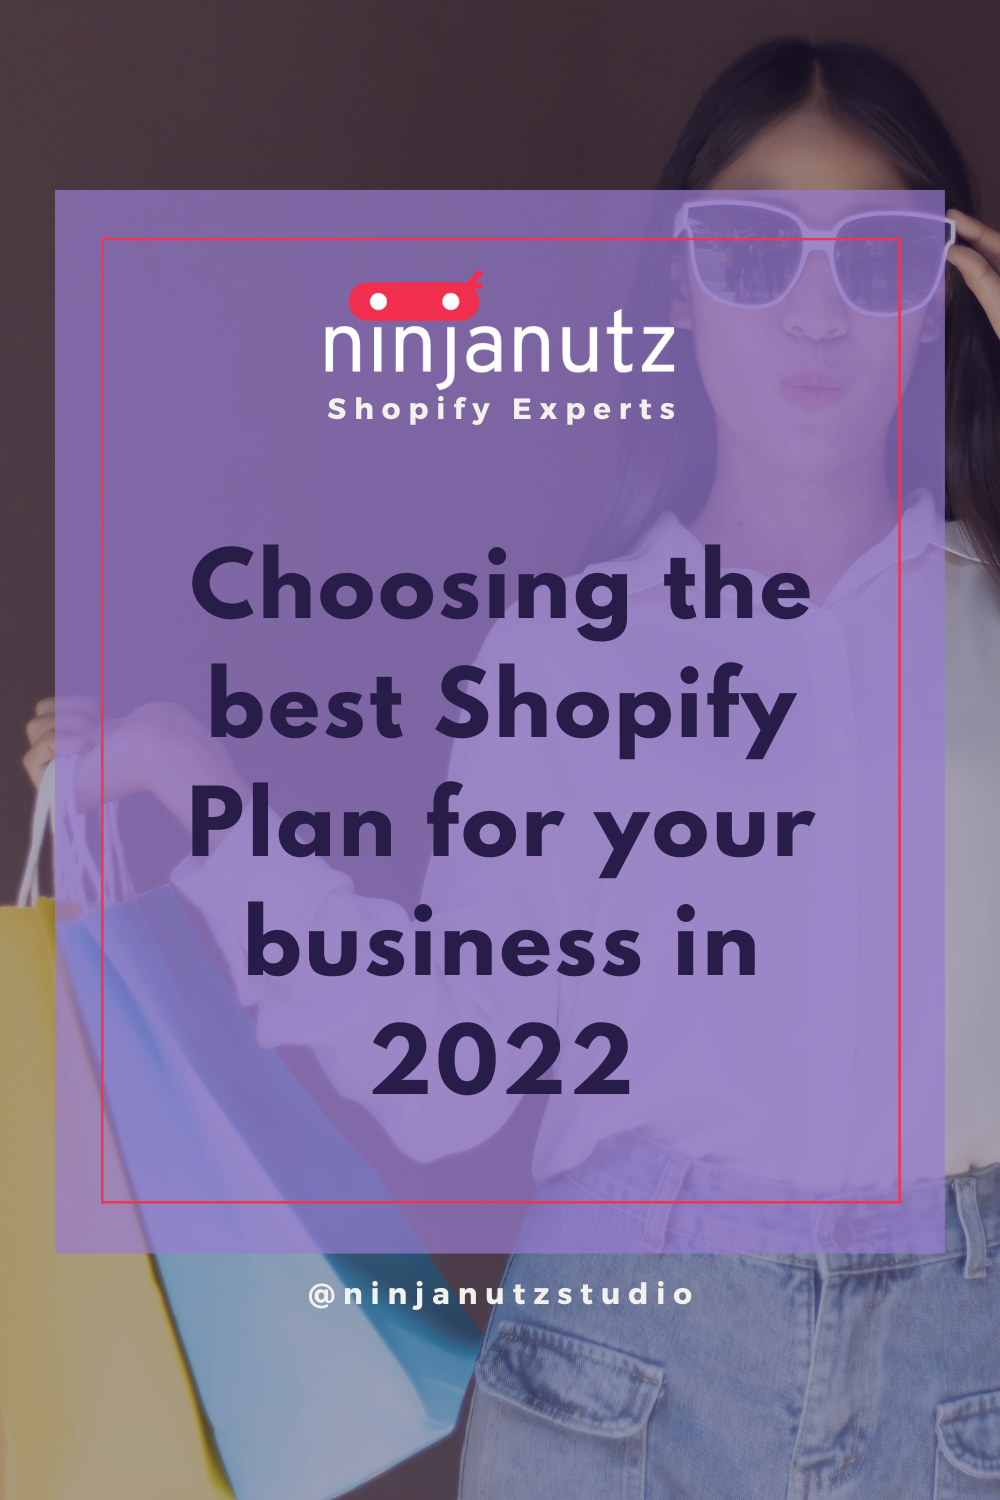 Choosing the best Shopify Plan for your business in 2022-2023 NinjaNutz®